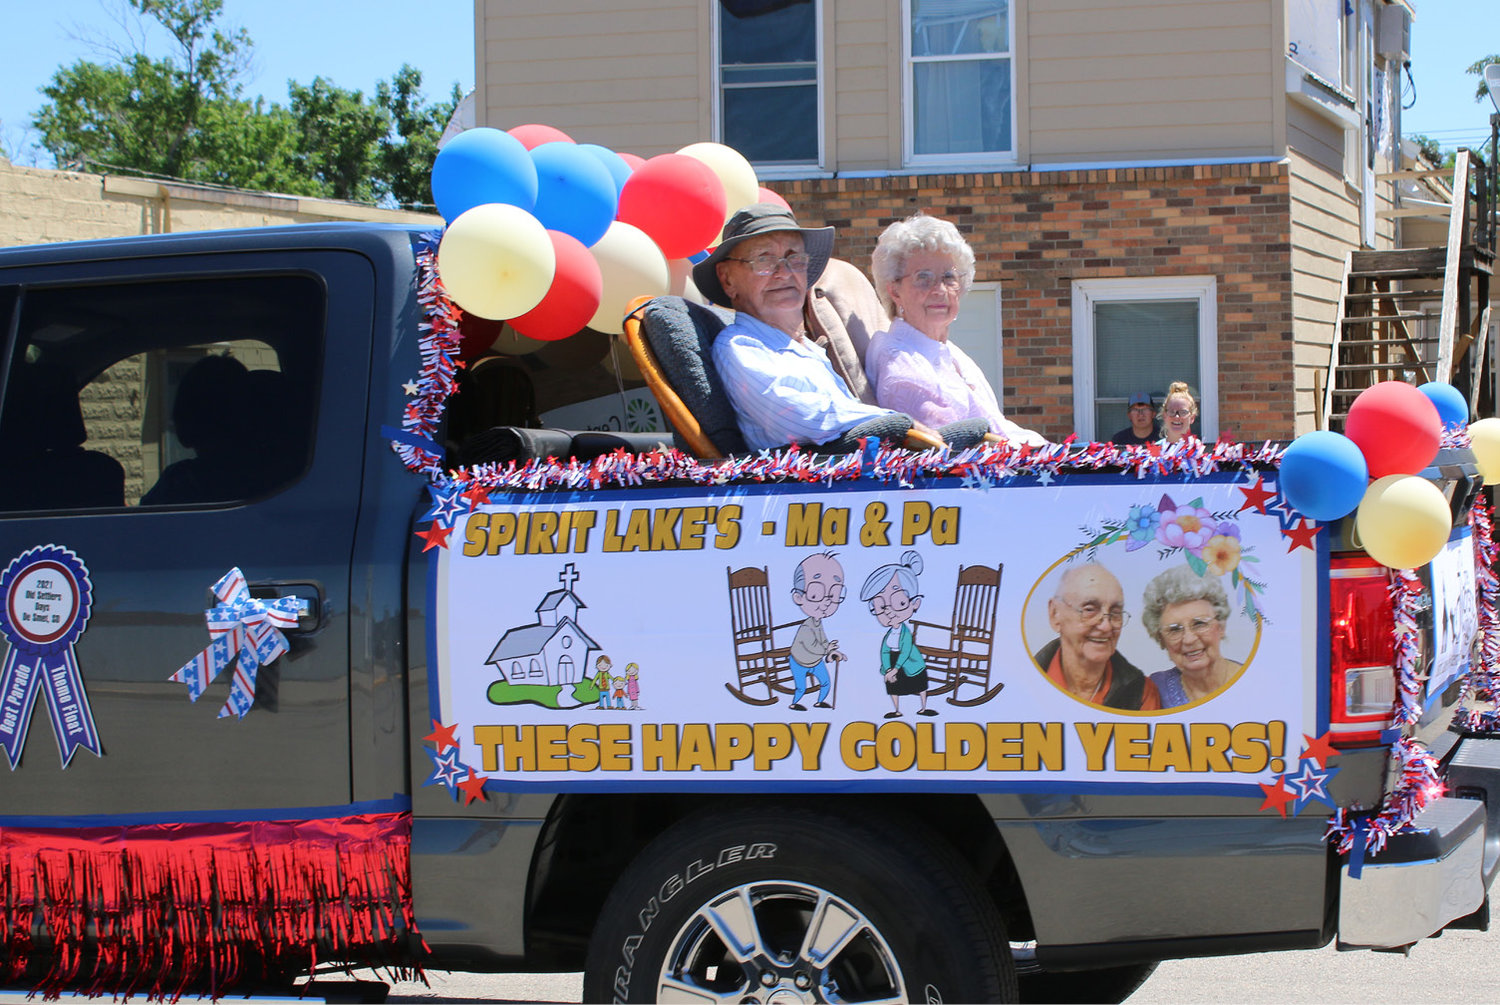 Cork and Illdena Poppen from Spirit Lake go for a ride in the Old Settlers Day Parade. Their entry won the “Best Parade Theme Float.” Cork and Illdena volunteered with the Laura Ingalls Wilder Pageant and have played Ma and Pa Ingalls numerous times. Illdena is also our correspondent from Spirit Lake.